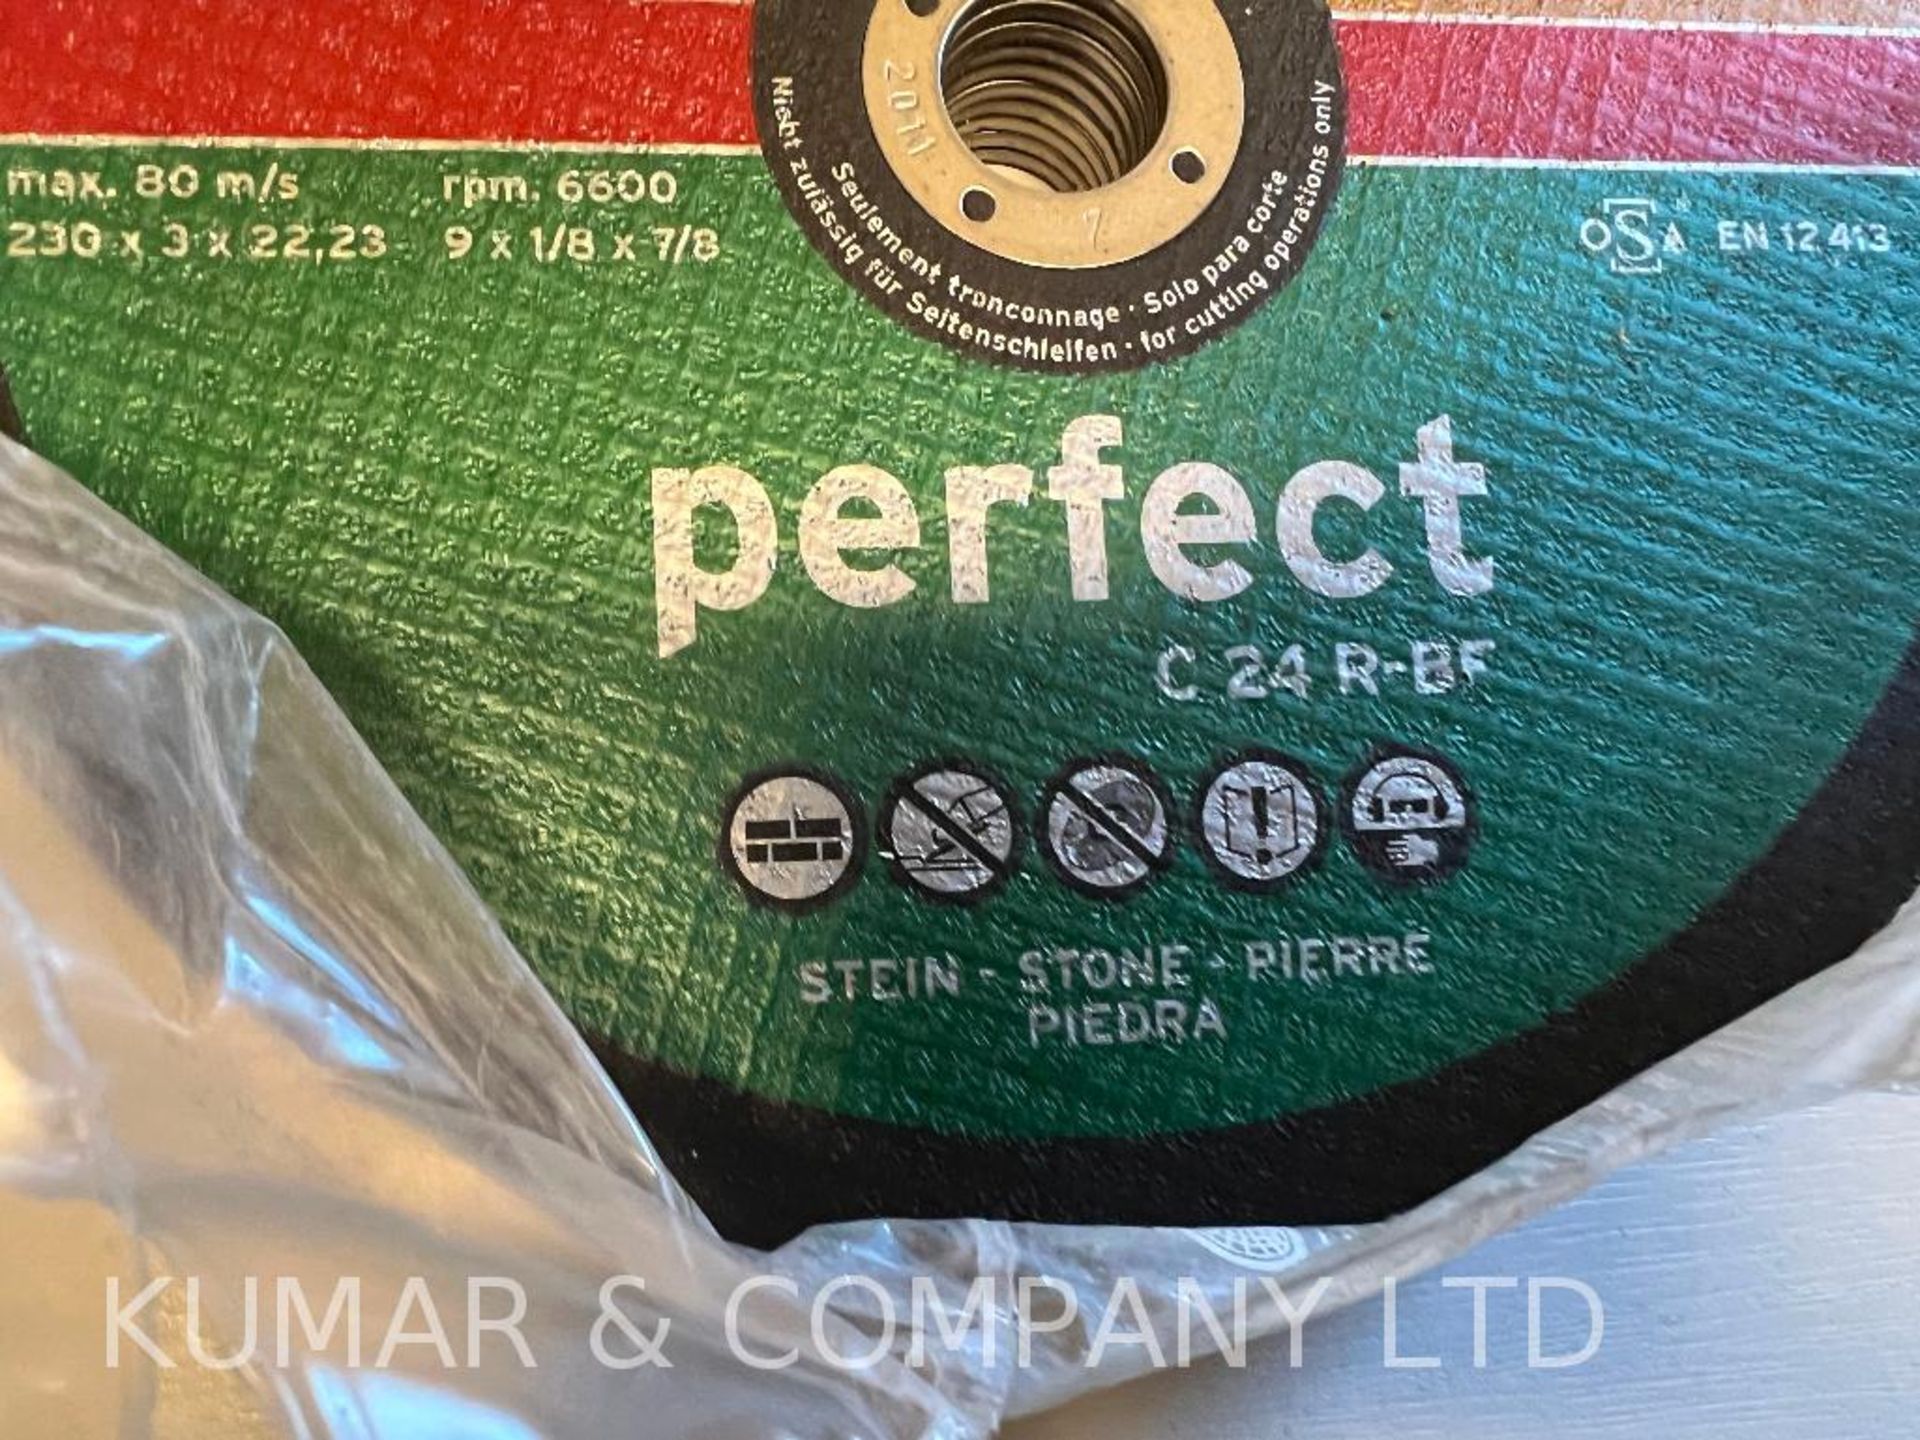 1 Pack of Perfect C24 R-BF 230x3x22,23 Stone Cutting Discs PLEASE NOTE: THIS LOT IS LOCATED IN CARDI - Image 3 of 3